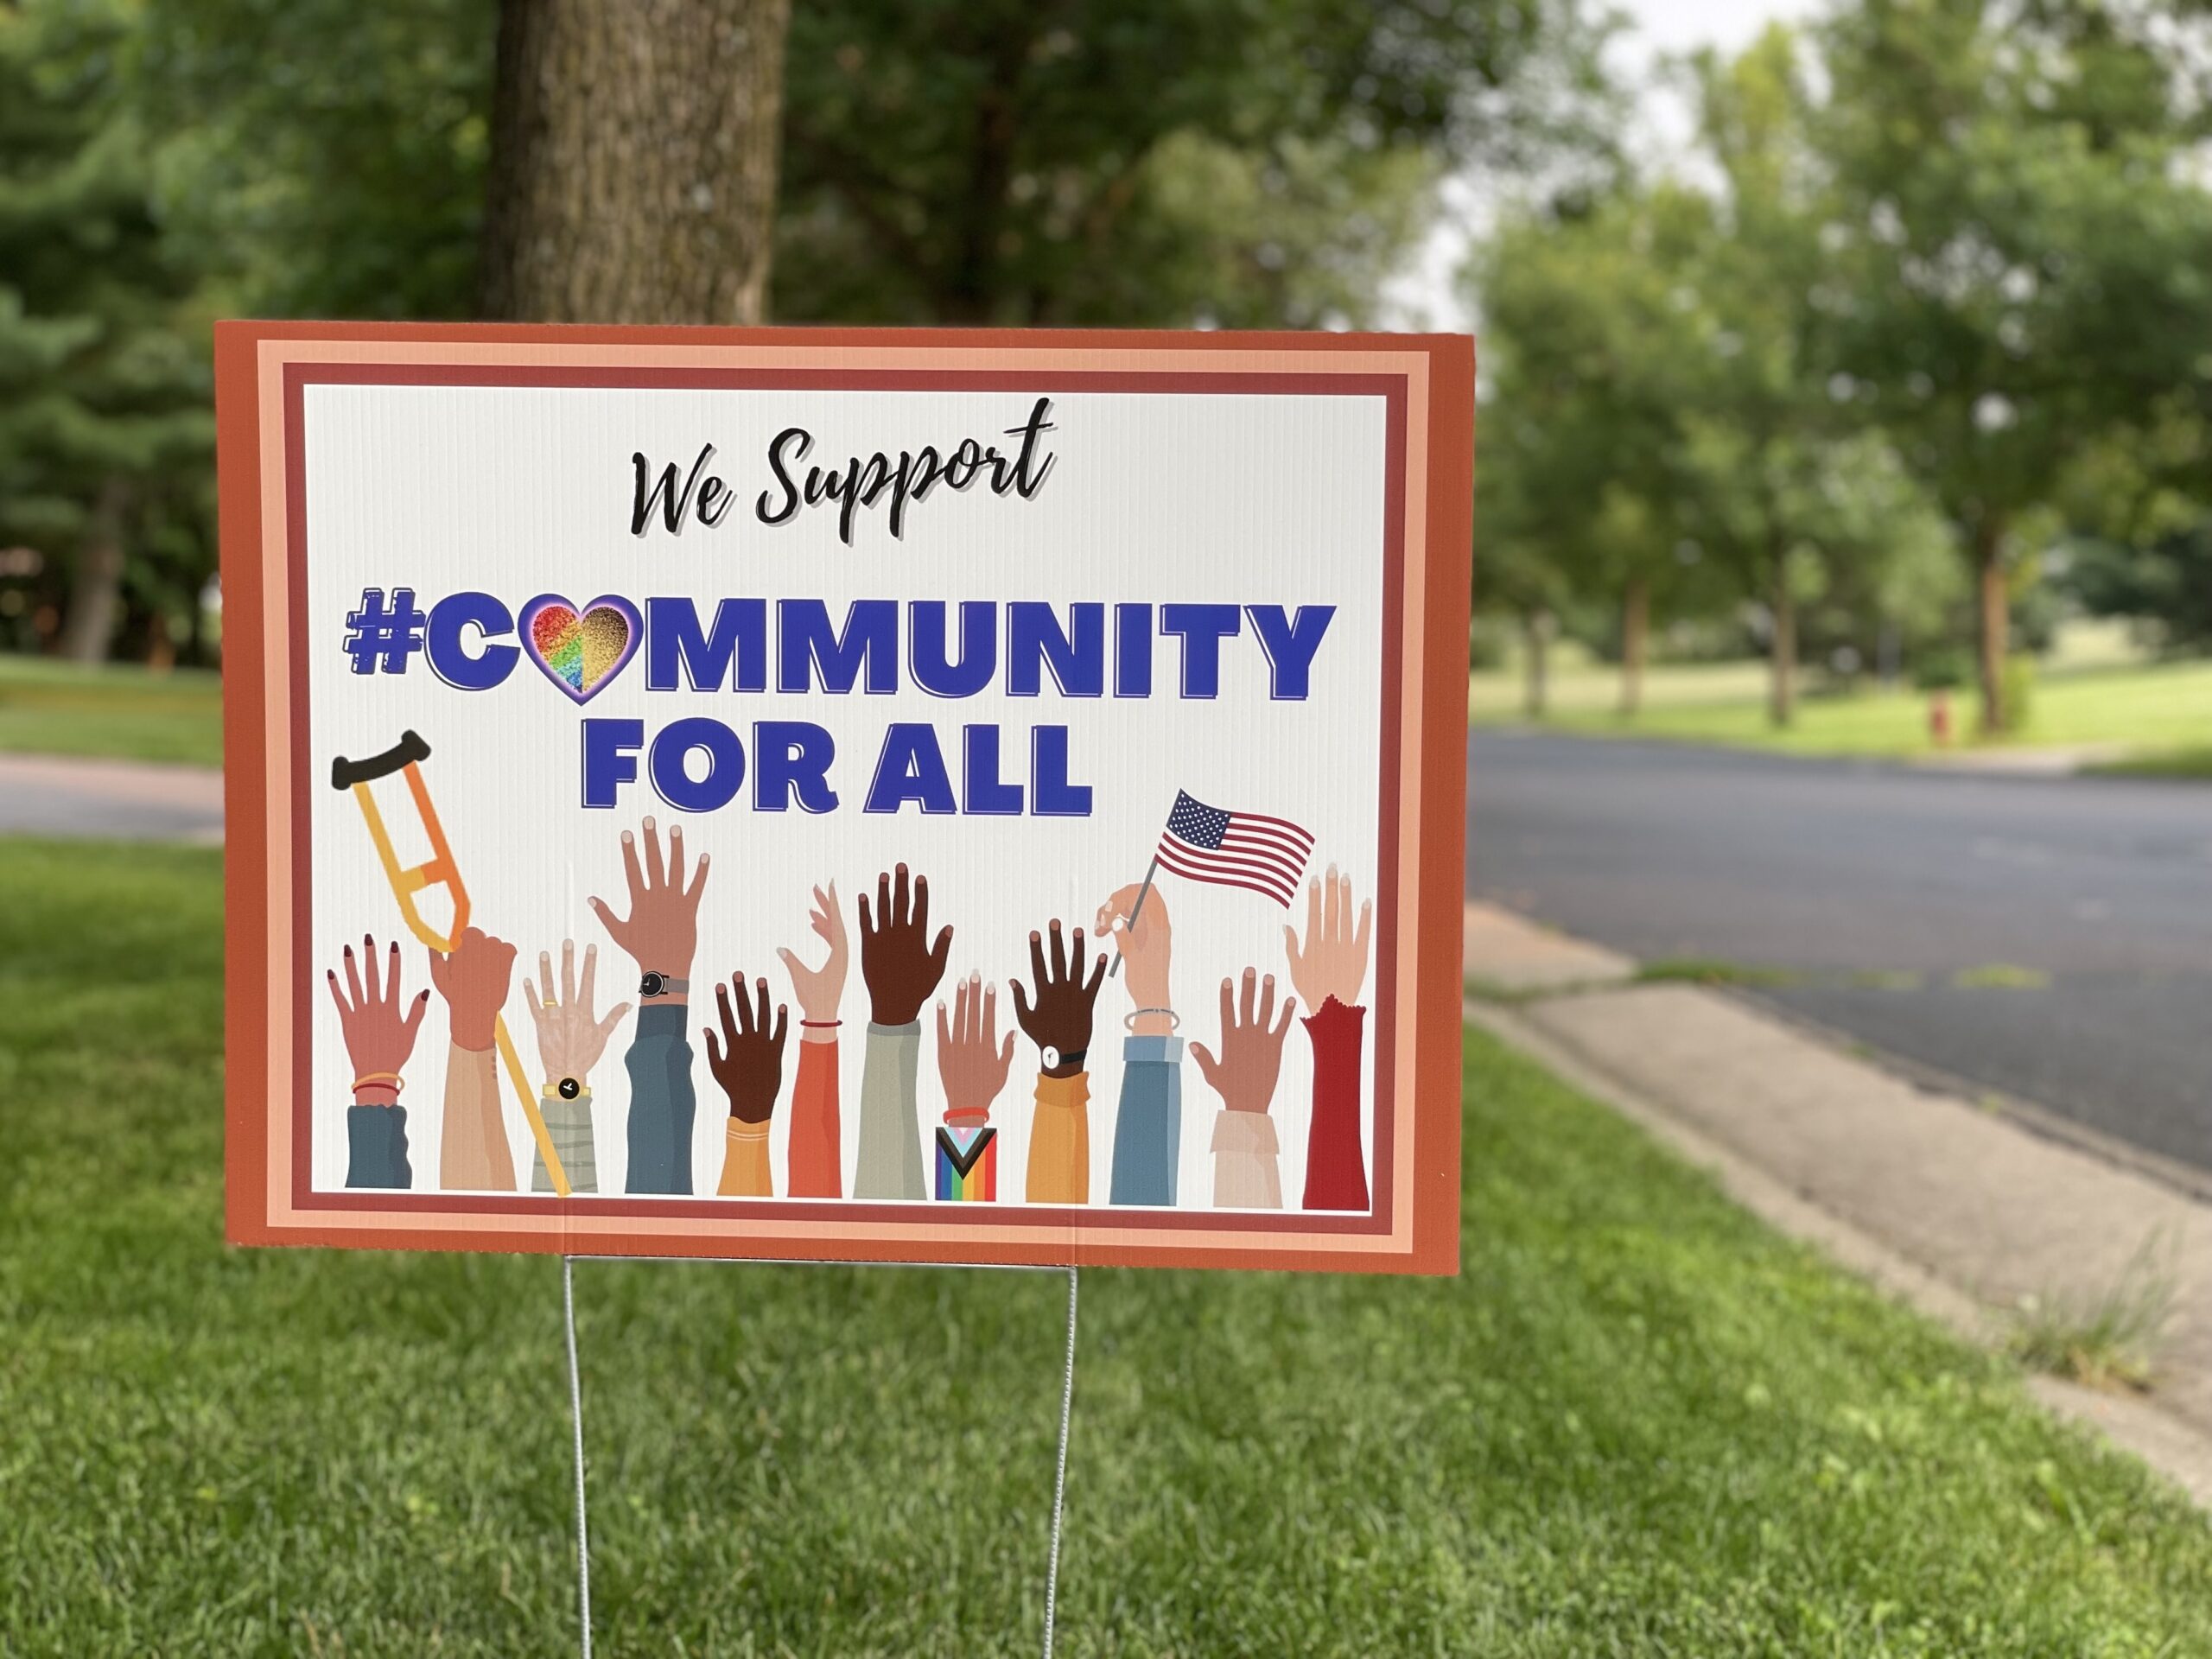 After ‘Community for All’ battle, Marathon County Board eliminates Diversity Affairs Commission